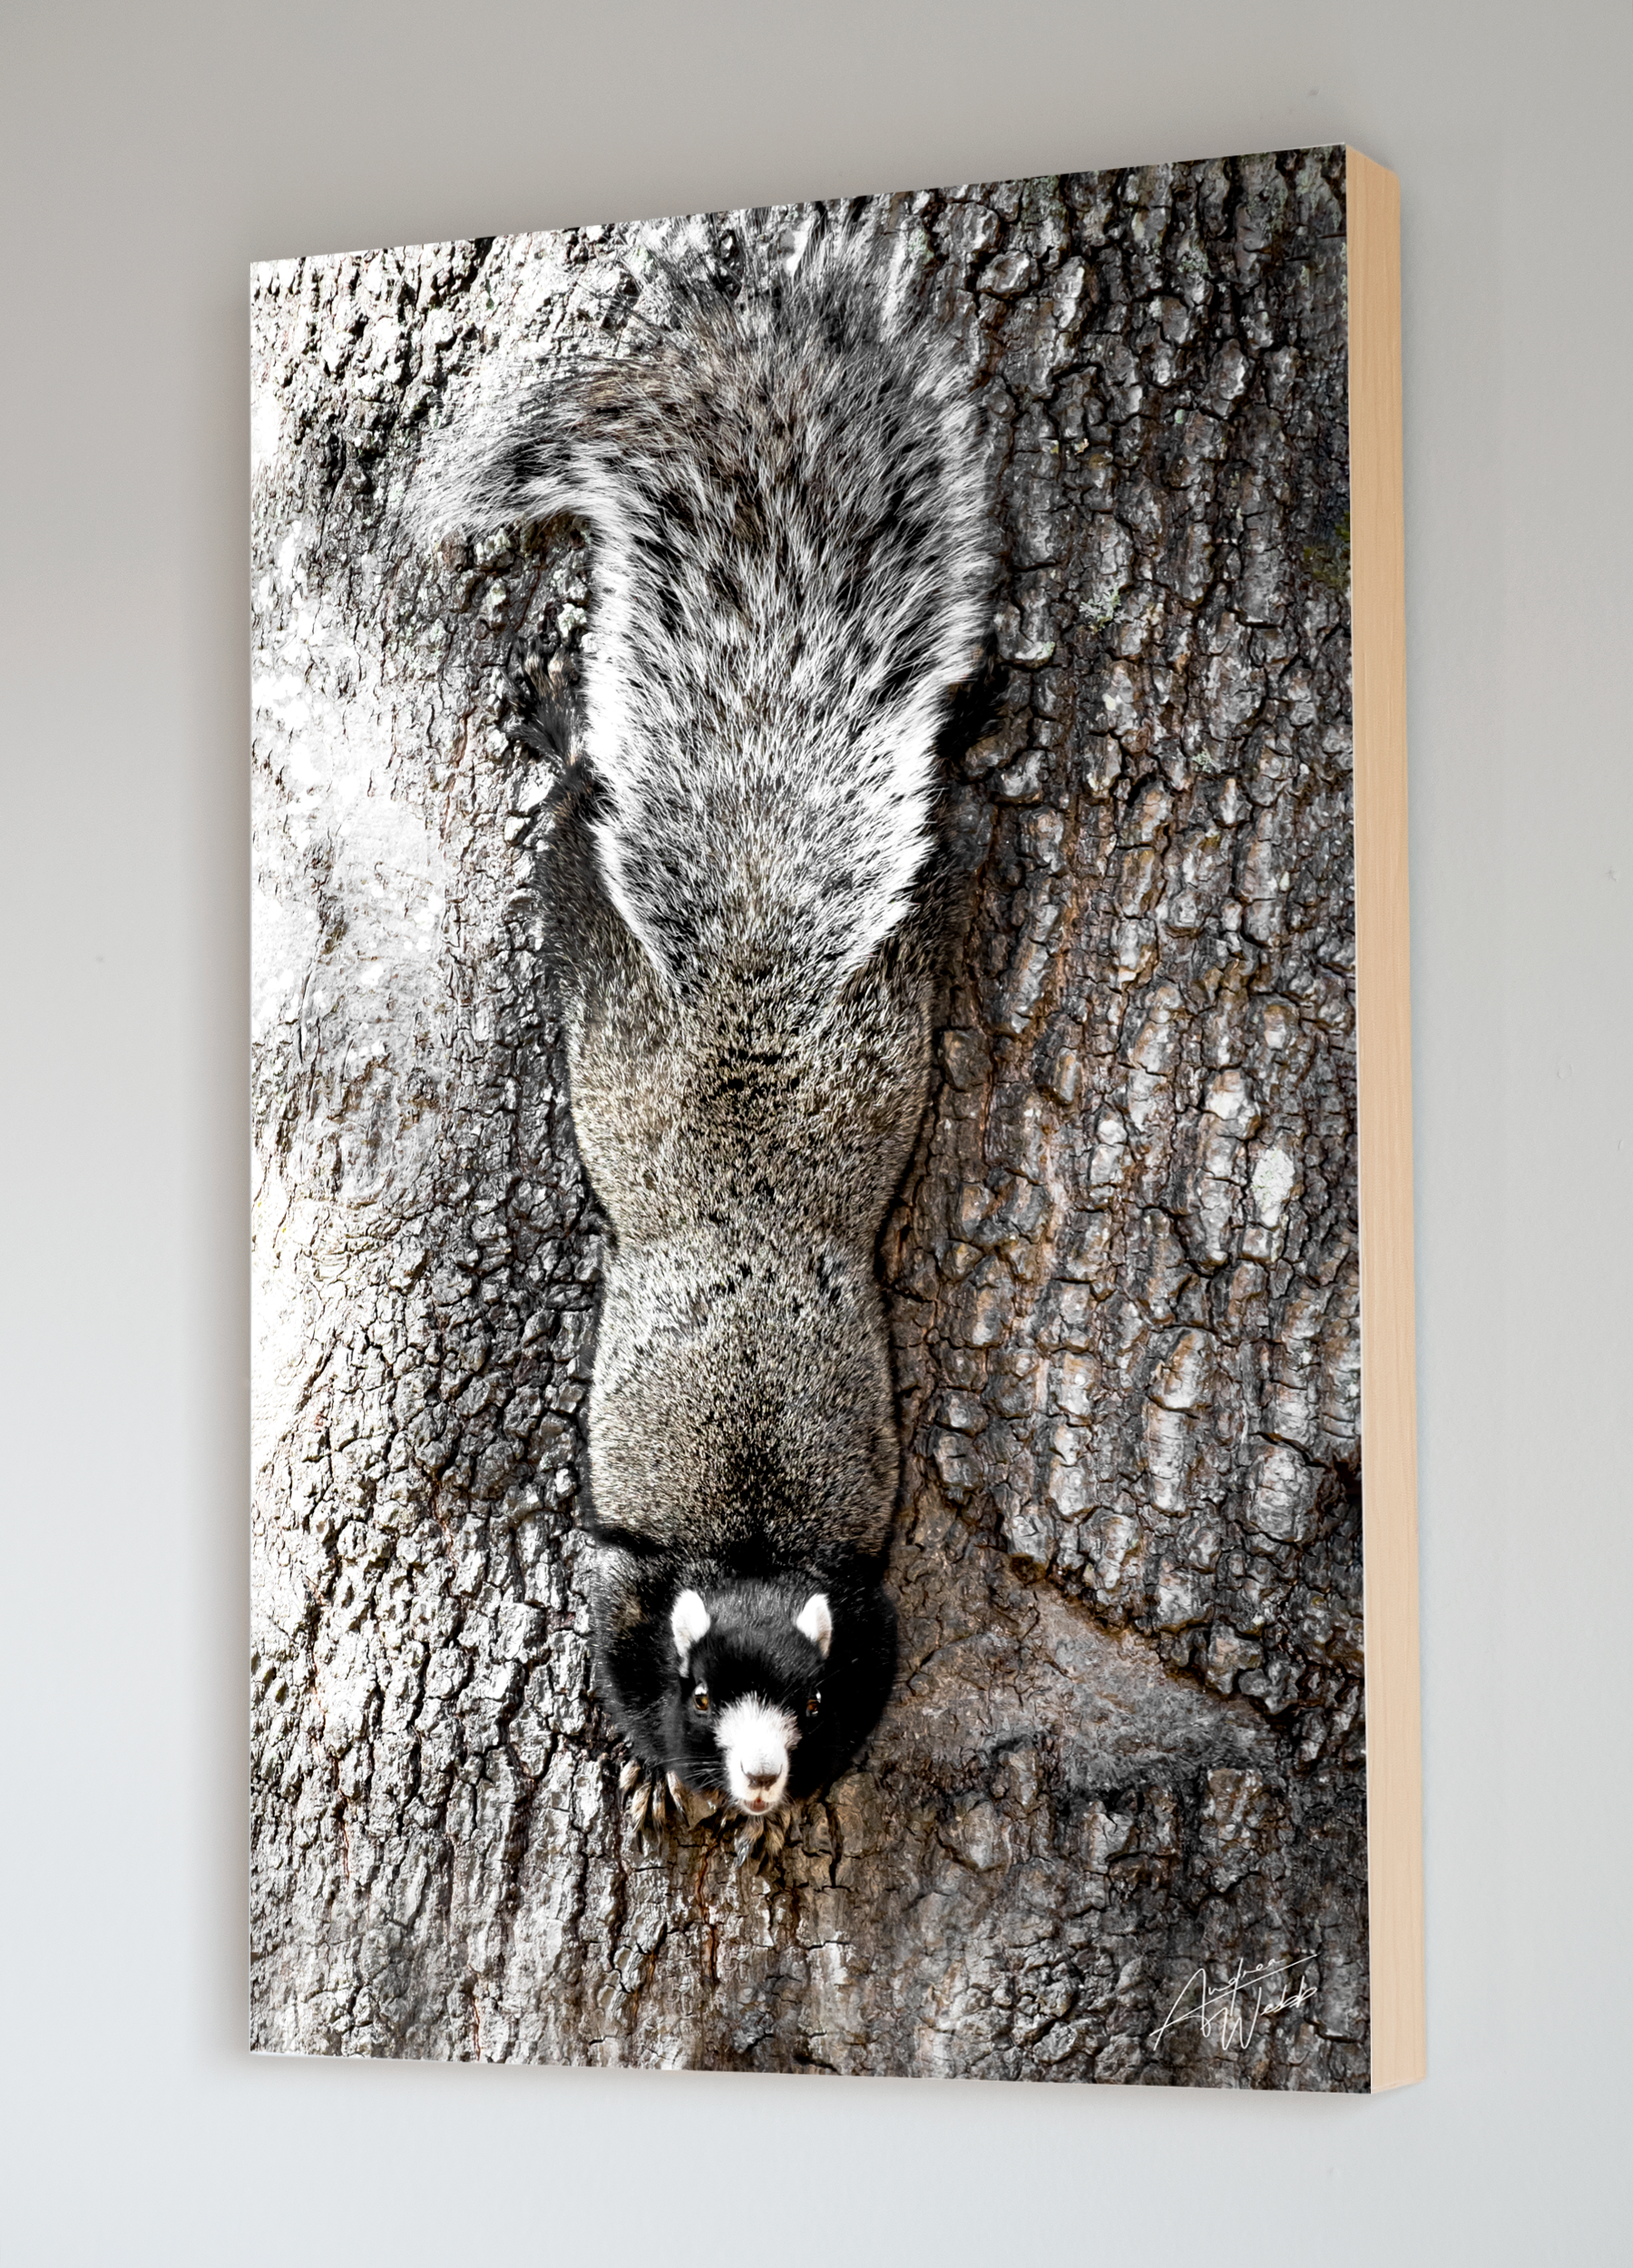 A Fox Squirrel Perched on a Tree in a Black Background Fine Art Portrait in Livingroom Setting. Fox Squirrel Photography. Fox Squirrel art. Fox Squirrel Print. Fox Squirrel canvas. Fox Squirrel wall art. Fox Squirrel gifts. Animal Photography.